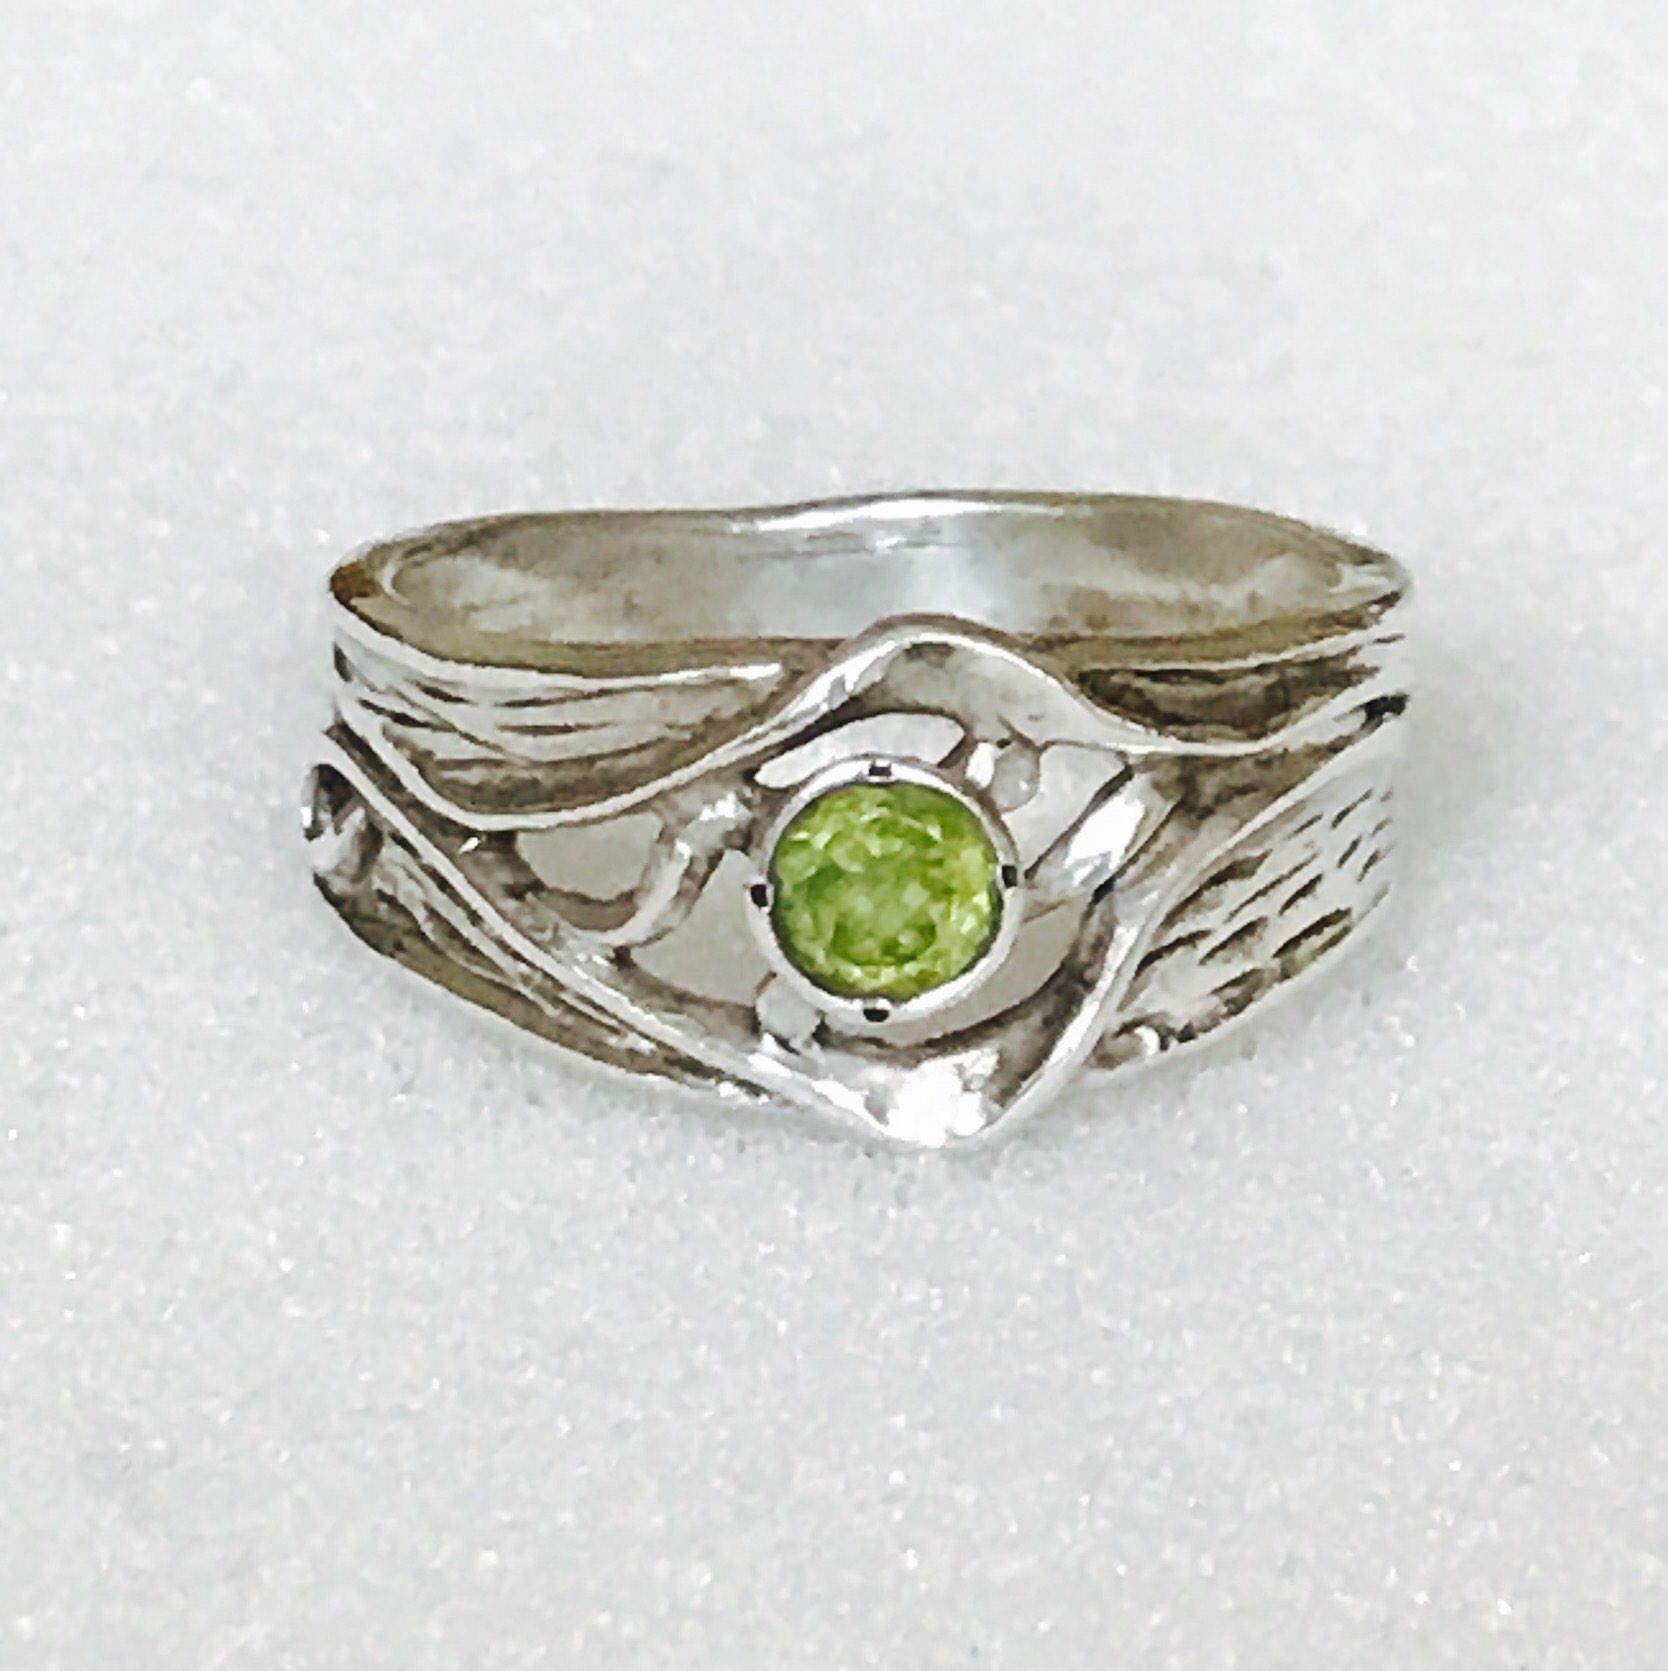 Stunning vintage sterling silver and Peridot ring